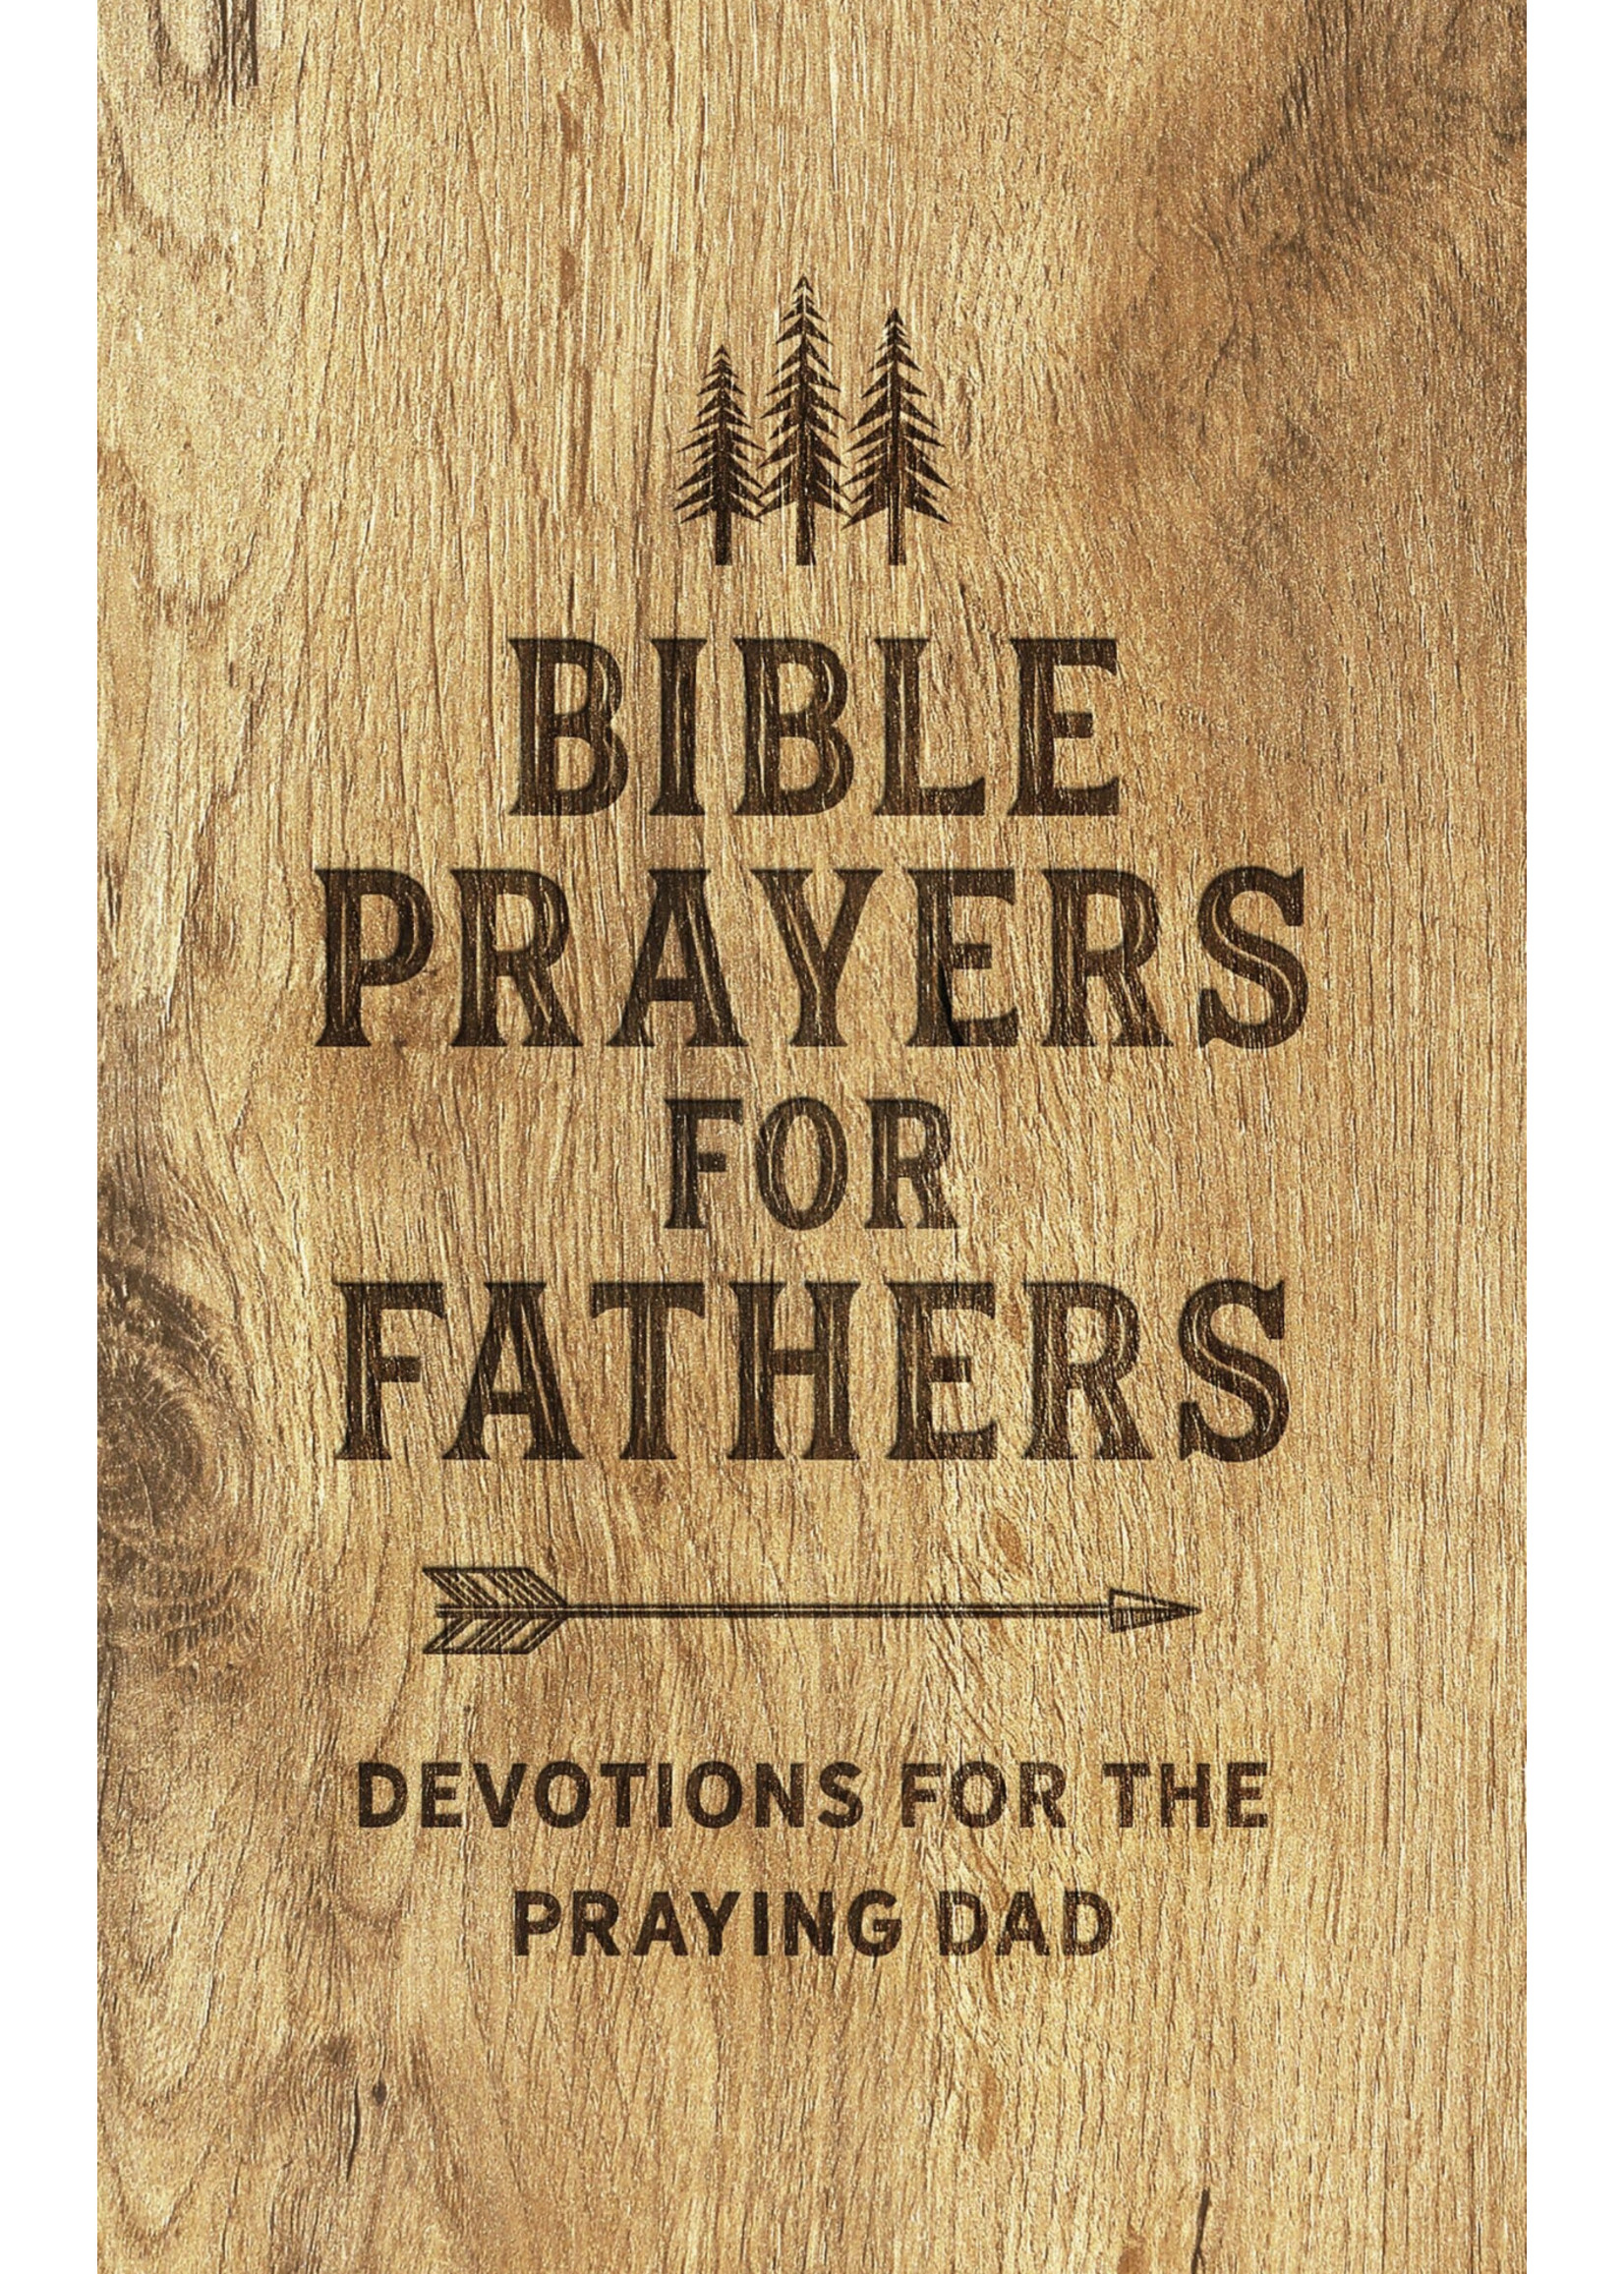 Barbour Publishing Bible Prayers for Fathers